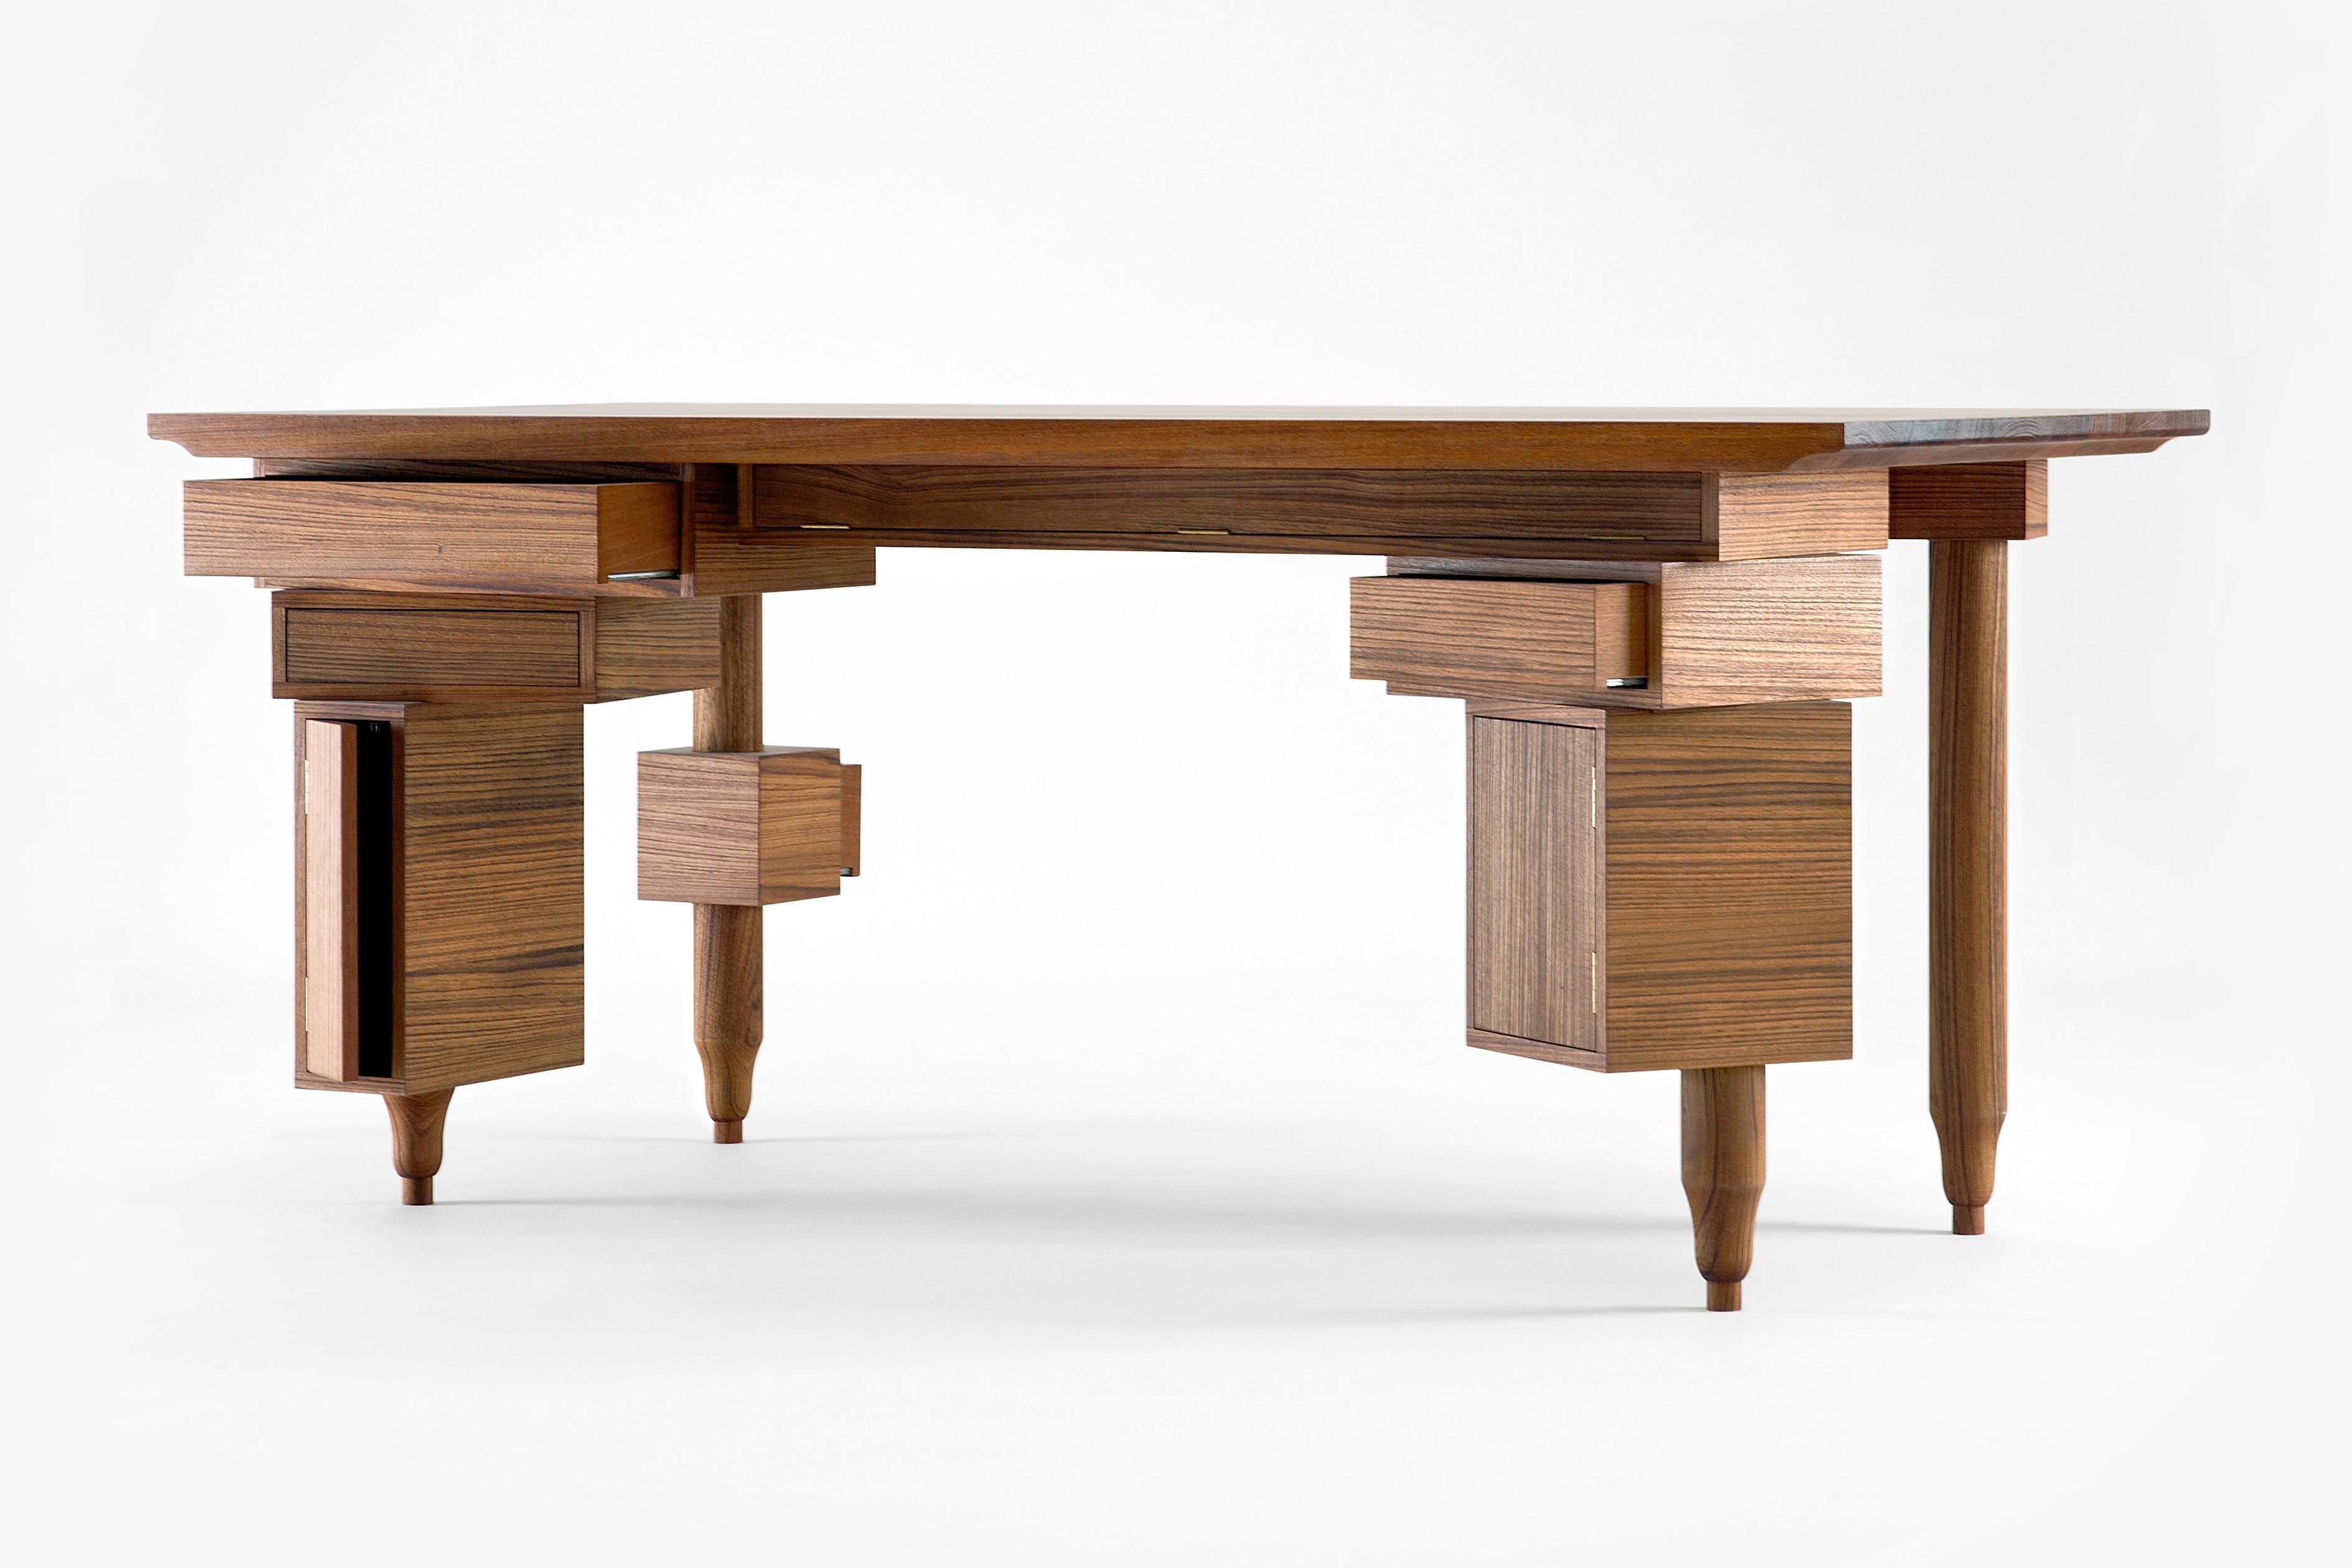 Le Bureau De Paolo Desk by Secondome Edizioni
Designer: Sam Baron.
Dimensions: D 80 x W 175 x H 75 cm.
Materials: Marine teak.

Collection / Production: Secondome. This piece can be customized. Available in different wood options: walnut wood and